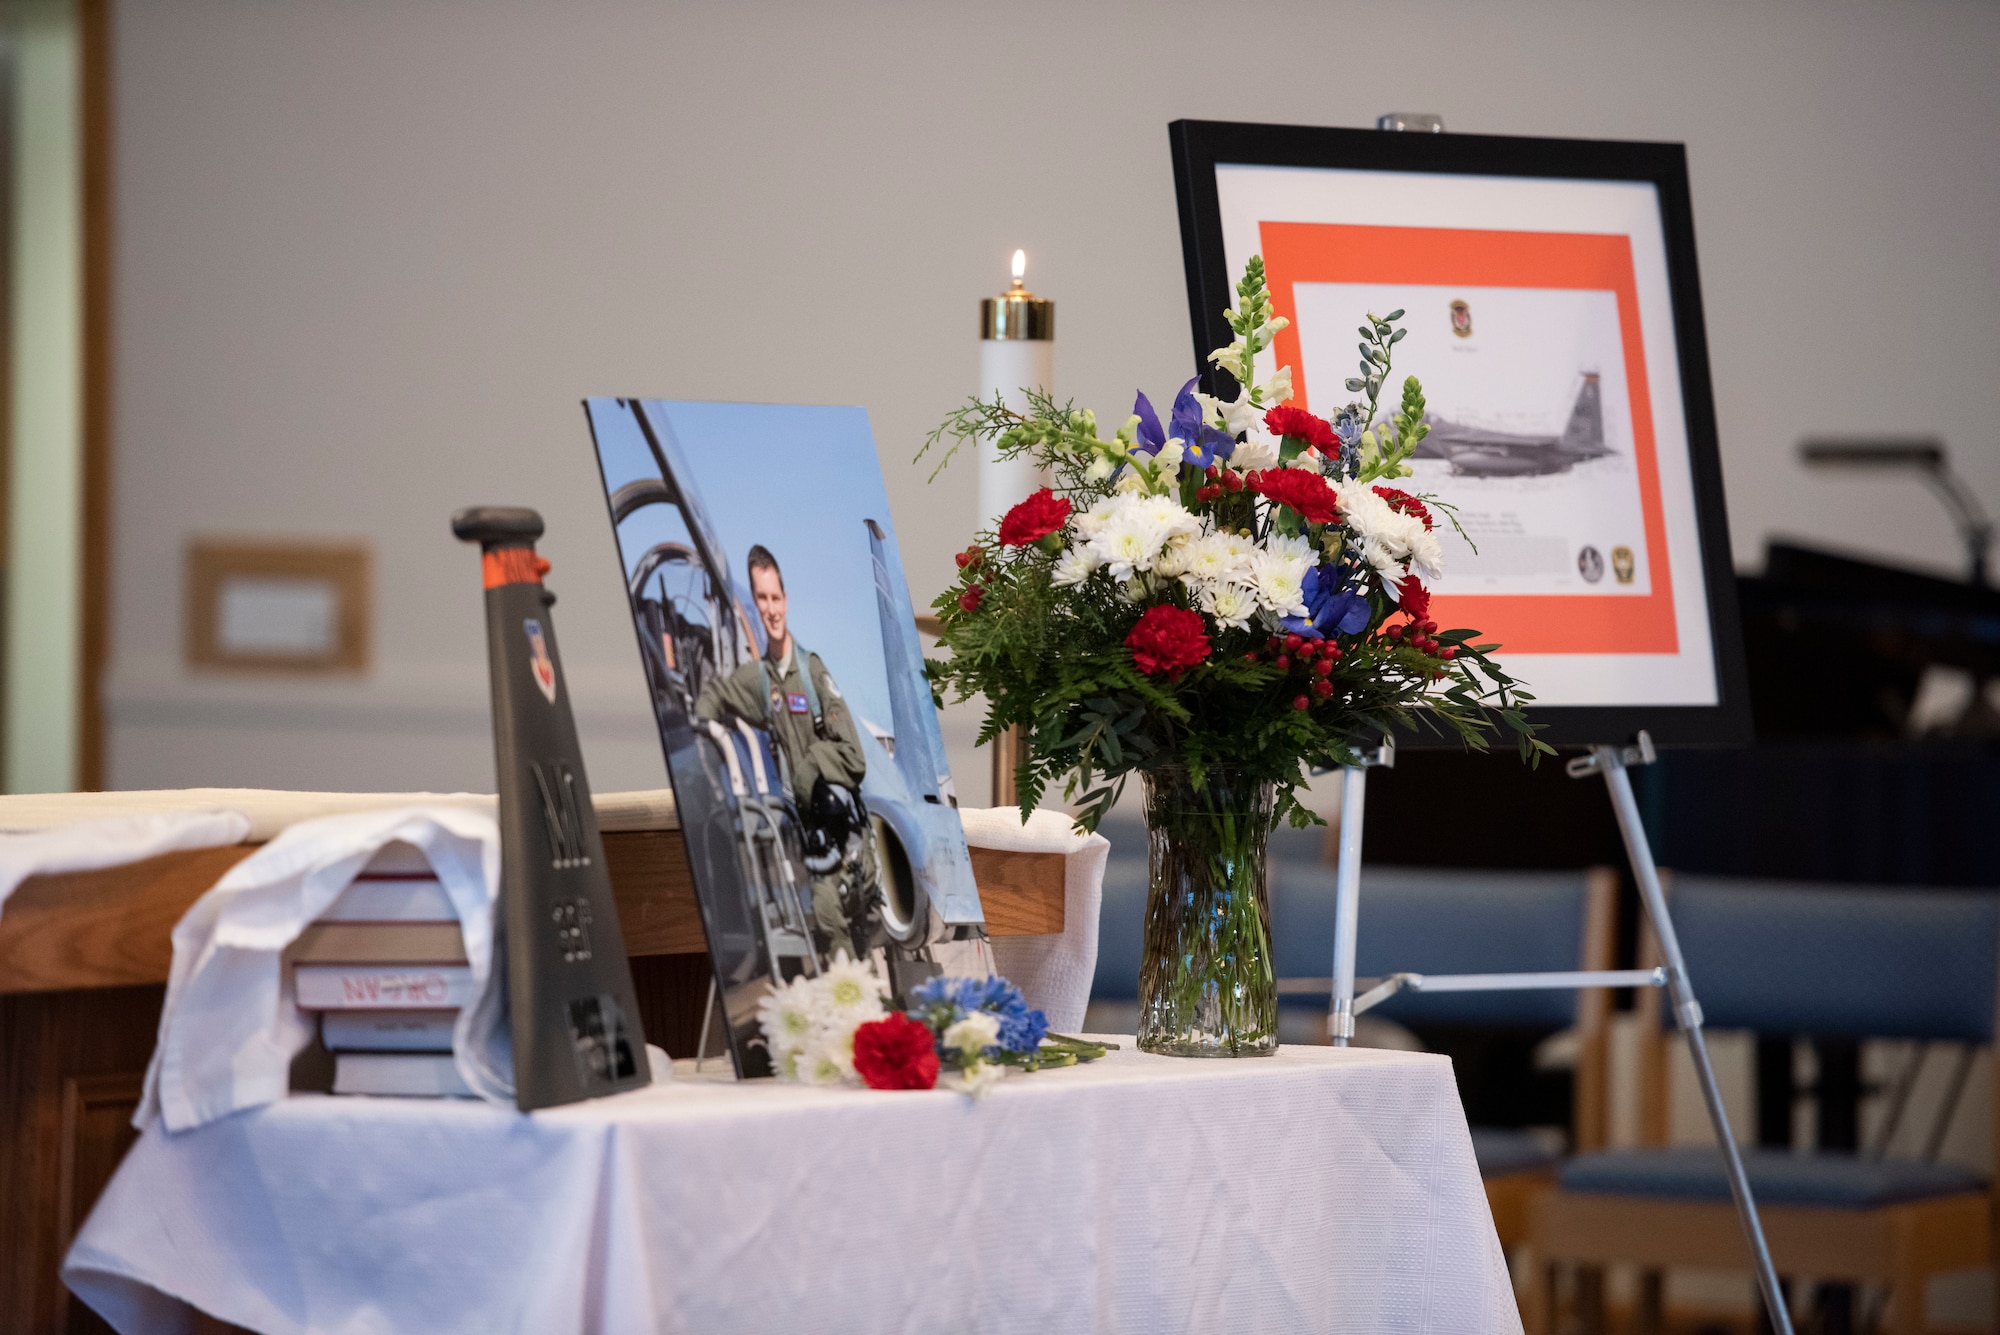 A table is set as a memorial for Capt. Ryan Gipson, 391st Fighter Squadron wing munitions manager, during his memorial ceremony,  Jan. 16, 2020, at Mountain Home Air Force Base, Idaho. This ceremony was held to celebrate the life of Capt. Ryan Gipson and his honorable years of service in the United States Air Force. (U.S. Air Force photo by Senior Airman Tyrell Hall)